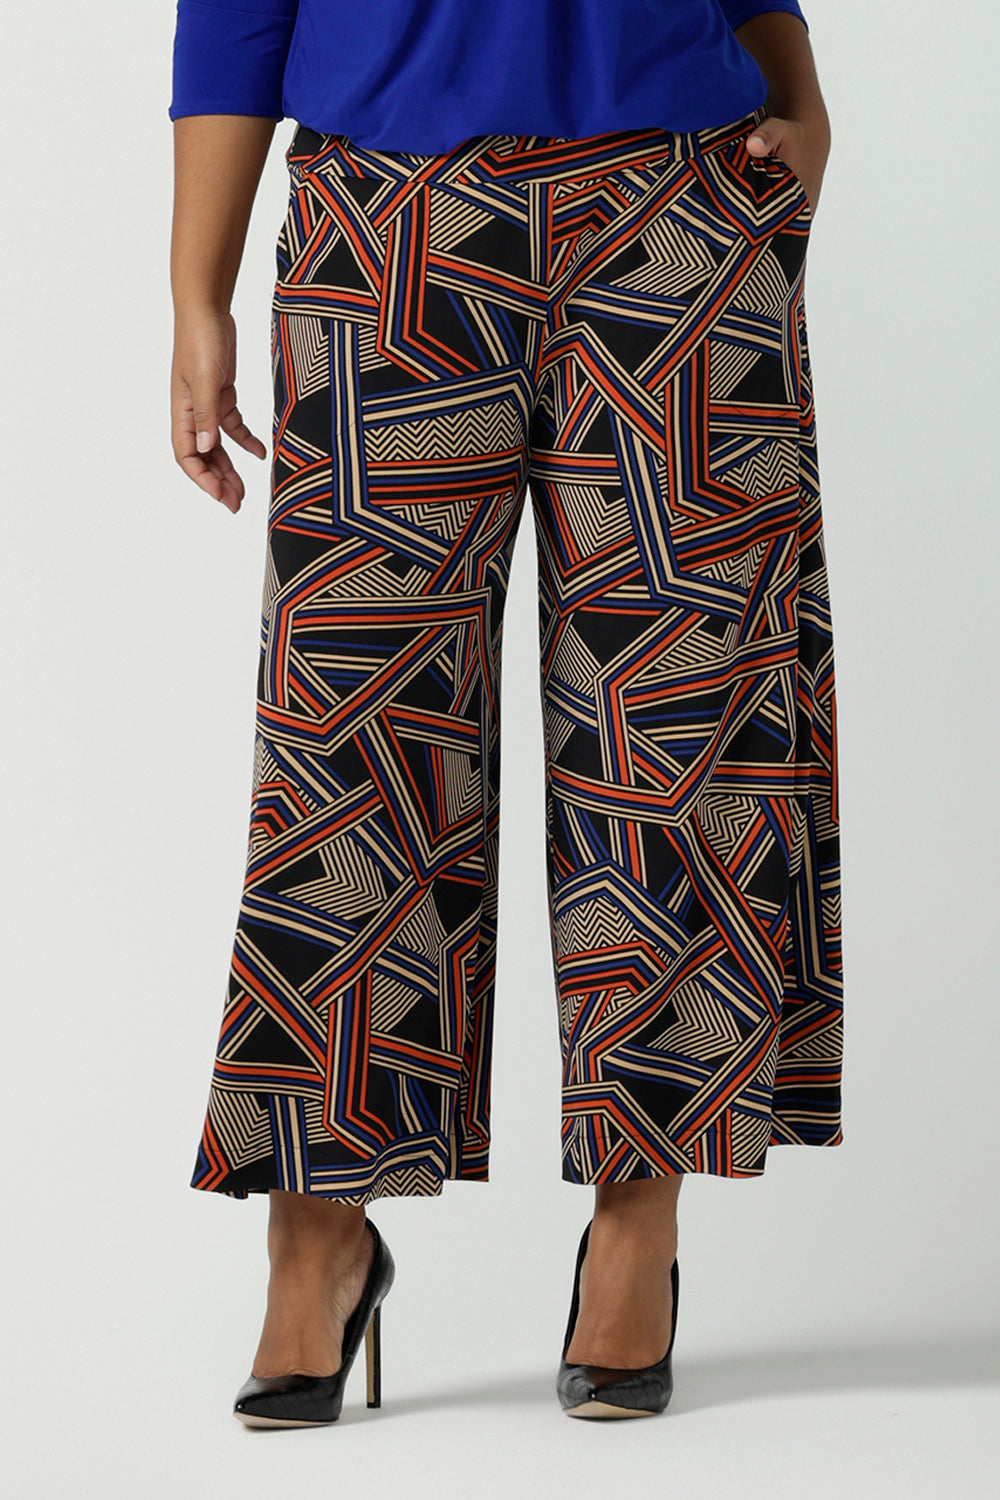 Front view of close up of a size 16 woman wears the Dany Culotte in Trixie, a printed Jersey work pant with a geometric pattern. Wide leg with functional pockets and wide waistband. Cropped length and petite height friendly. Made in Australia for women size 8 - 24.